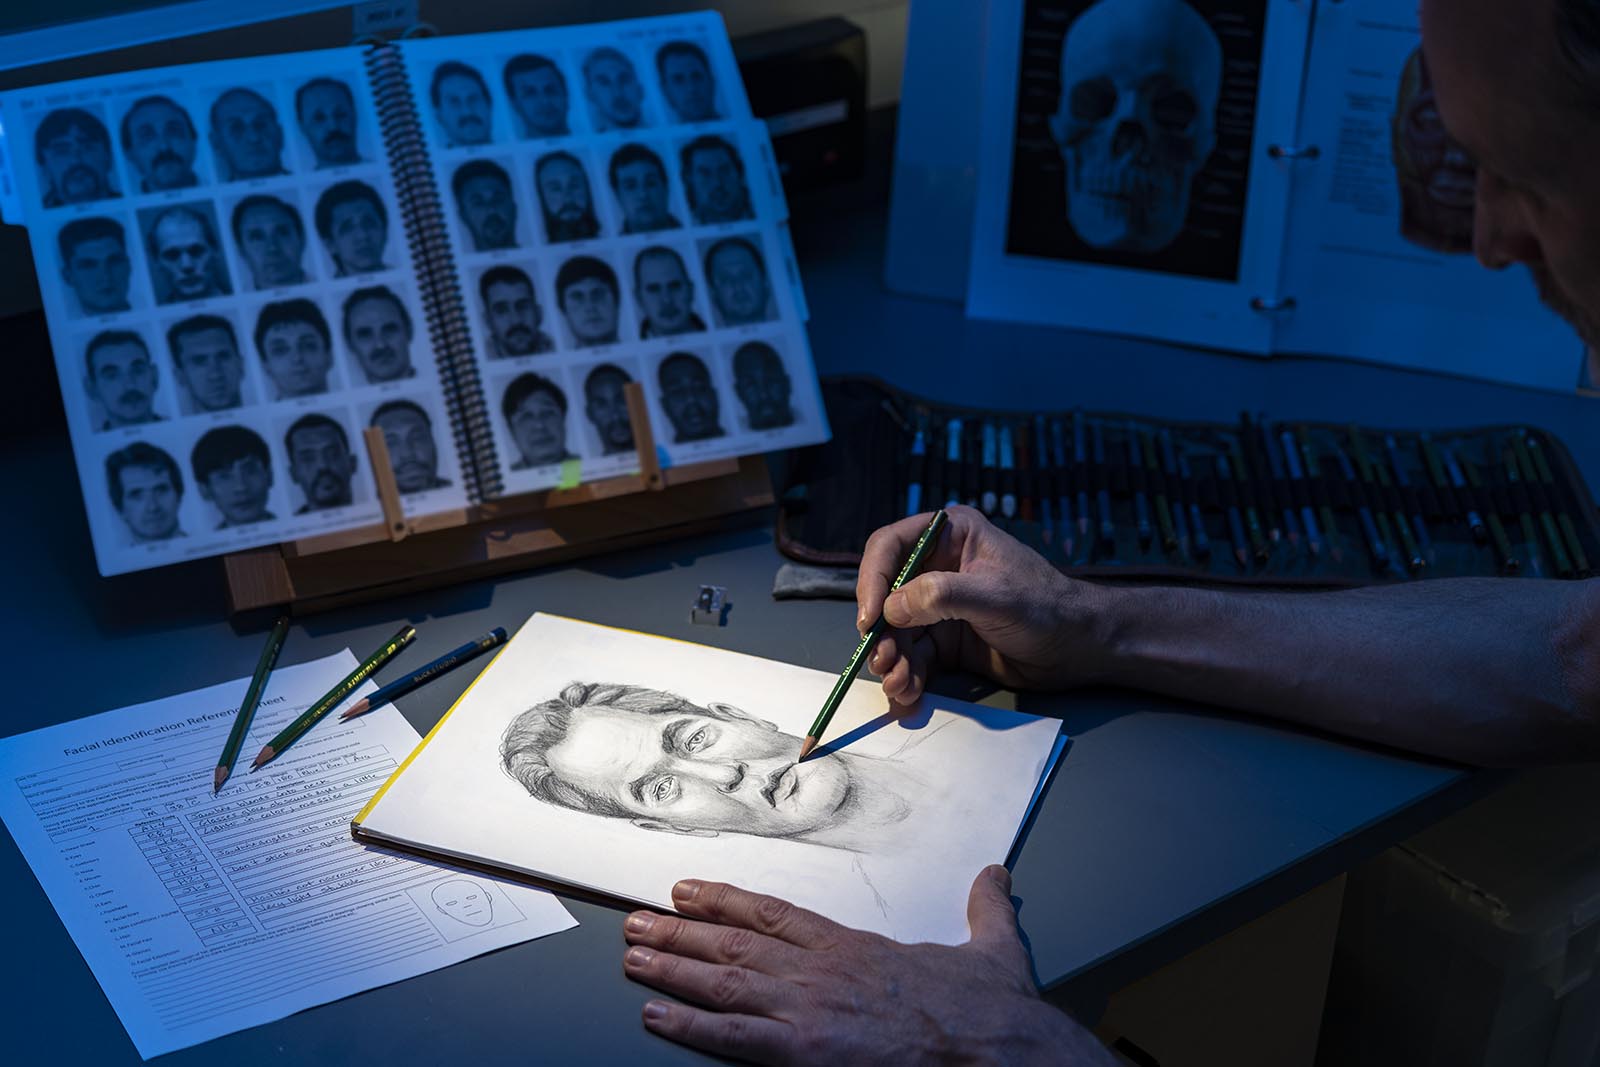 With extensive training in craniofacial anatomy and art, FBI Laboratory forensic artists can produce composite sketches, digital image modification, postmortem imaging, and facial approximations.